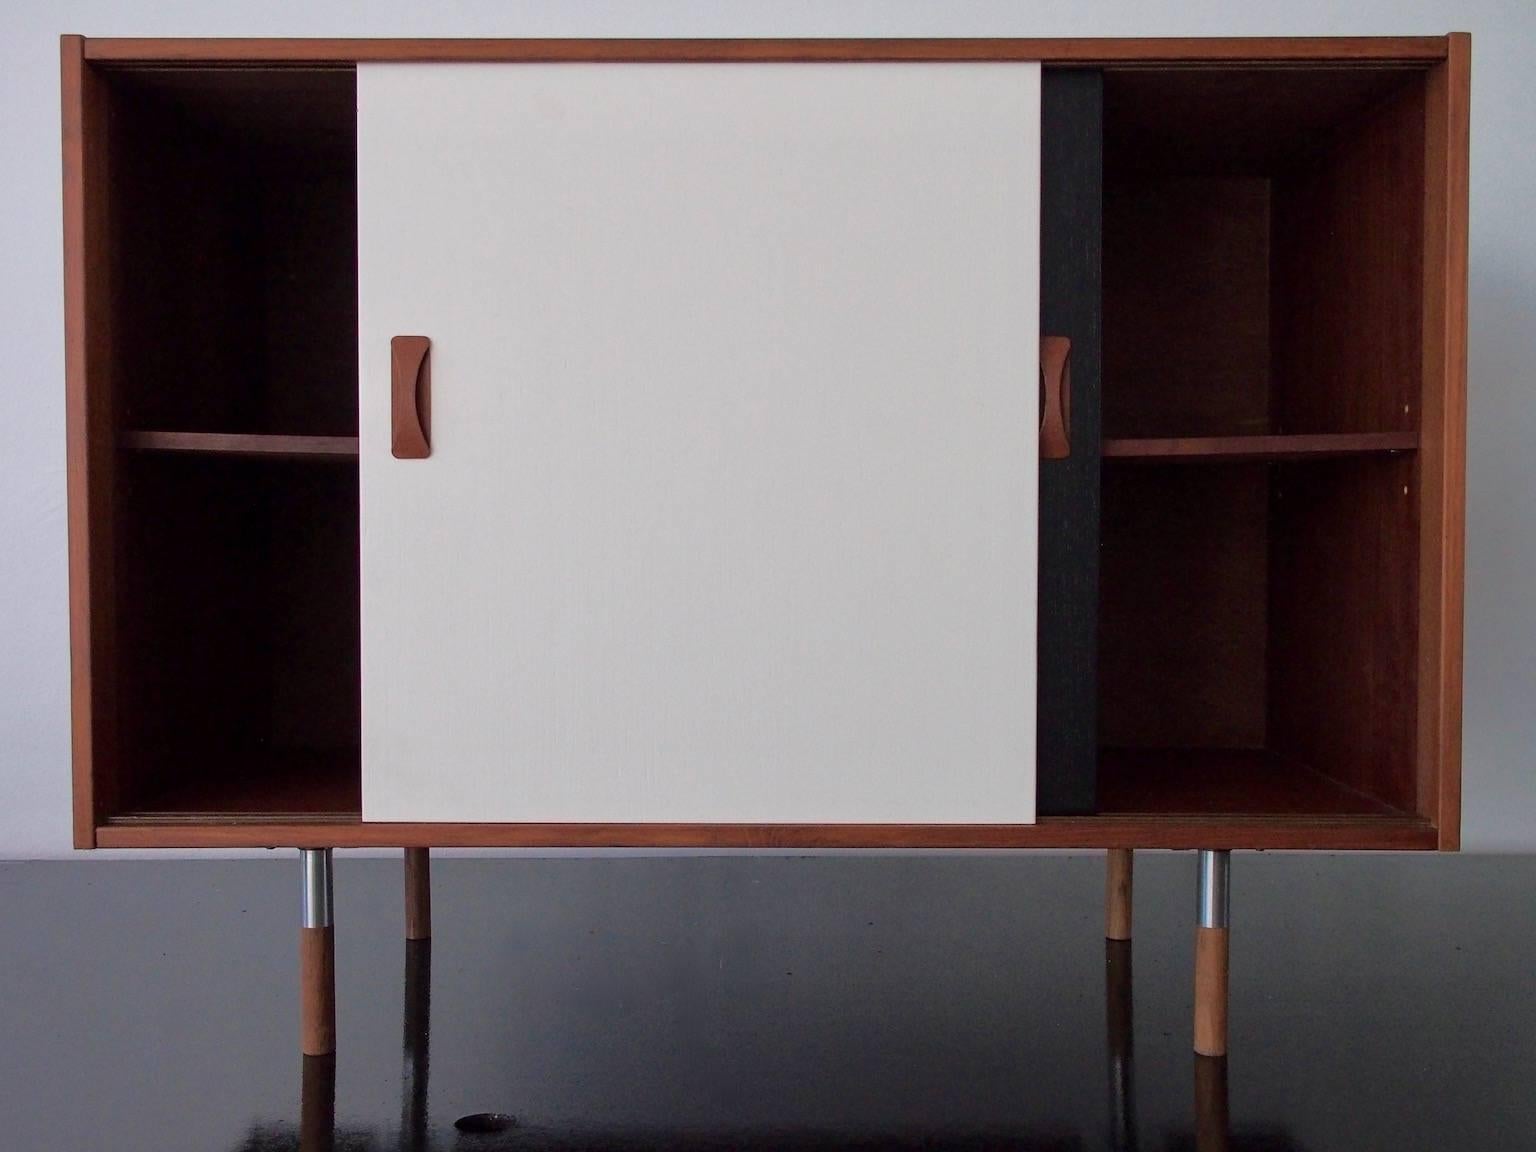 Clausen & Søn sideboard veneered with teak, front with lacquered black and white sliding doors. Later mounted unoriginal brushed steel legs with shoes of teak, circa 1960s.